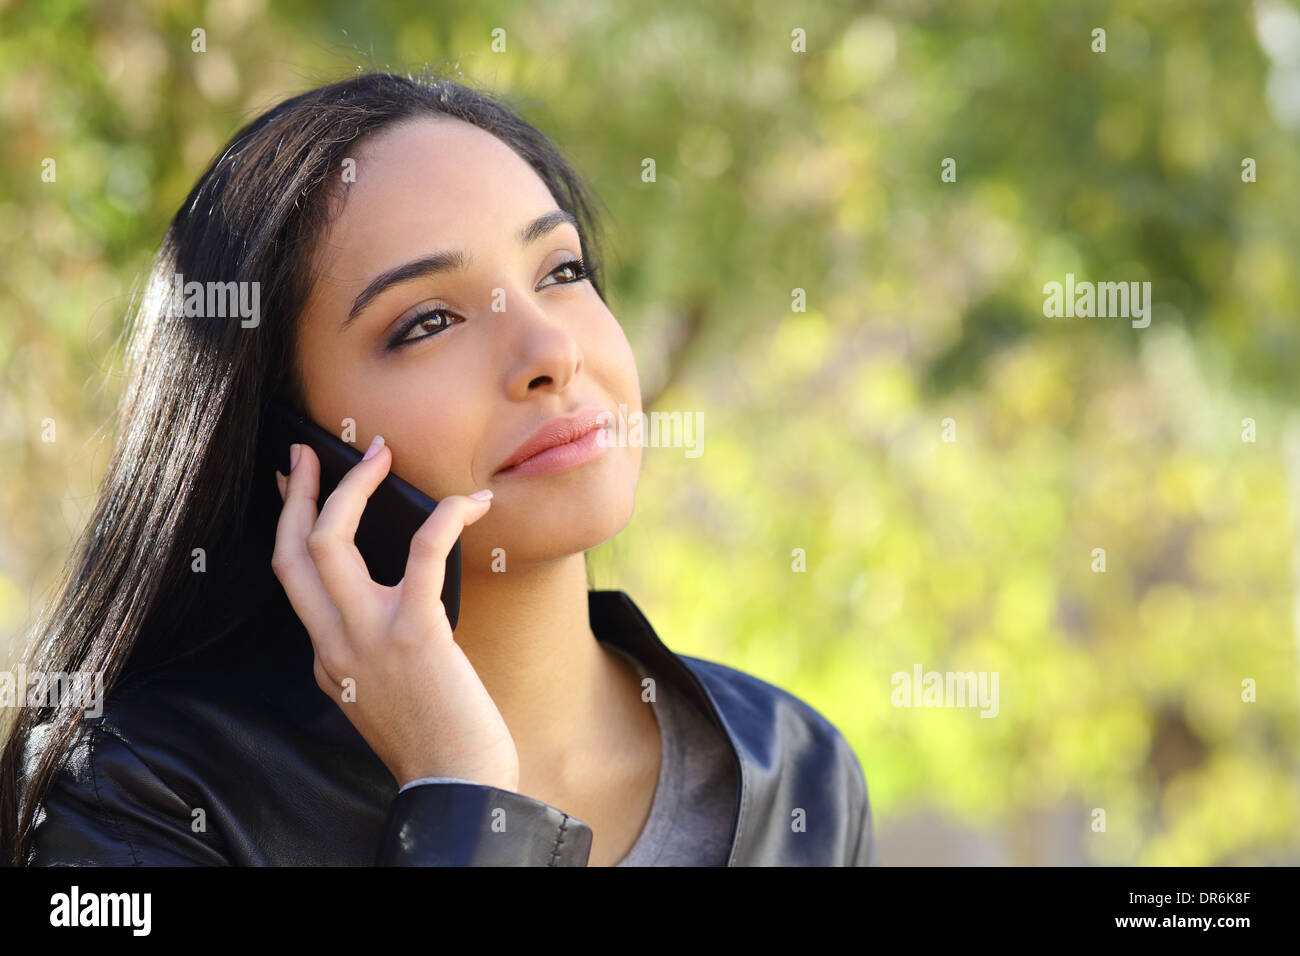 Arab business woman on the mobile phone in a park with a green background Stock Photo